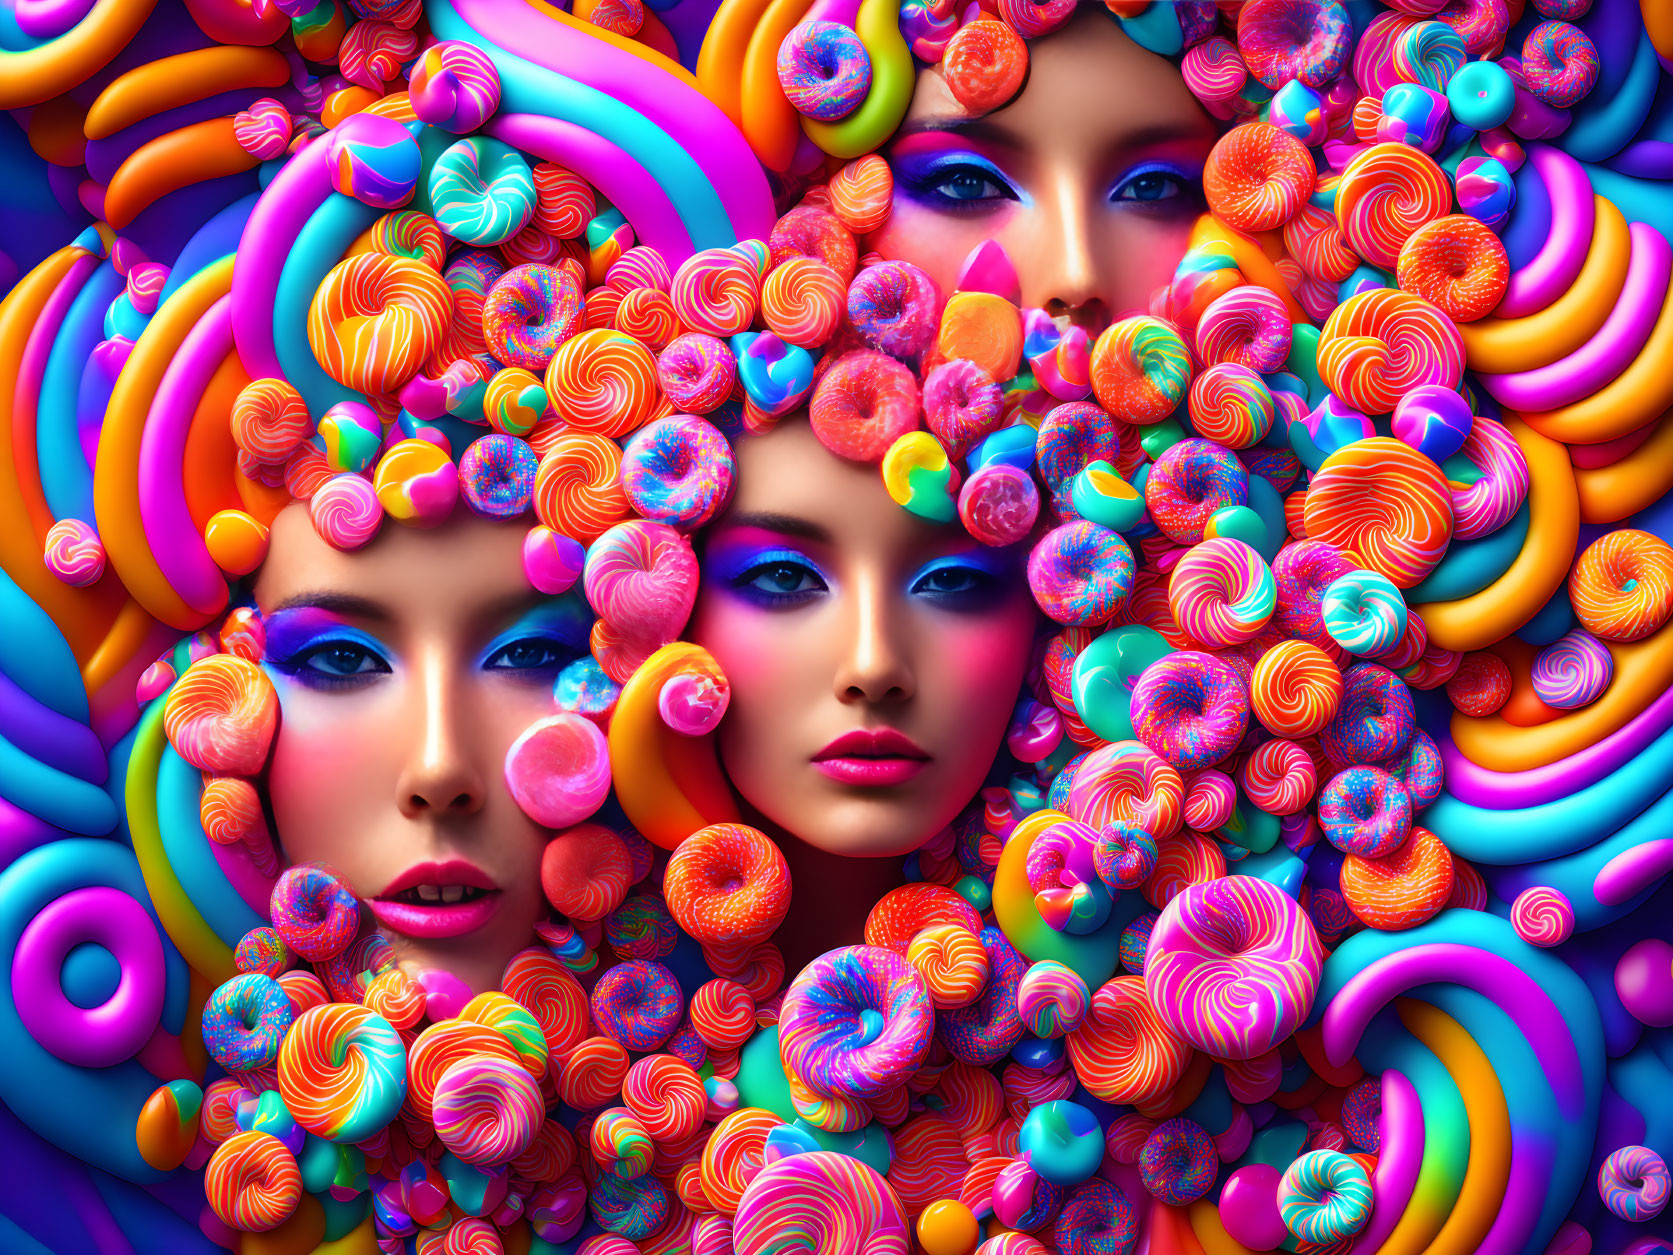 Vibrant surreal art: three faces with swirling candies in blues, pinks, and oranges